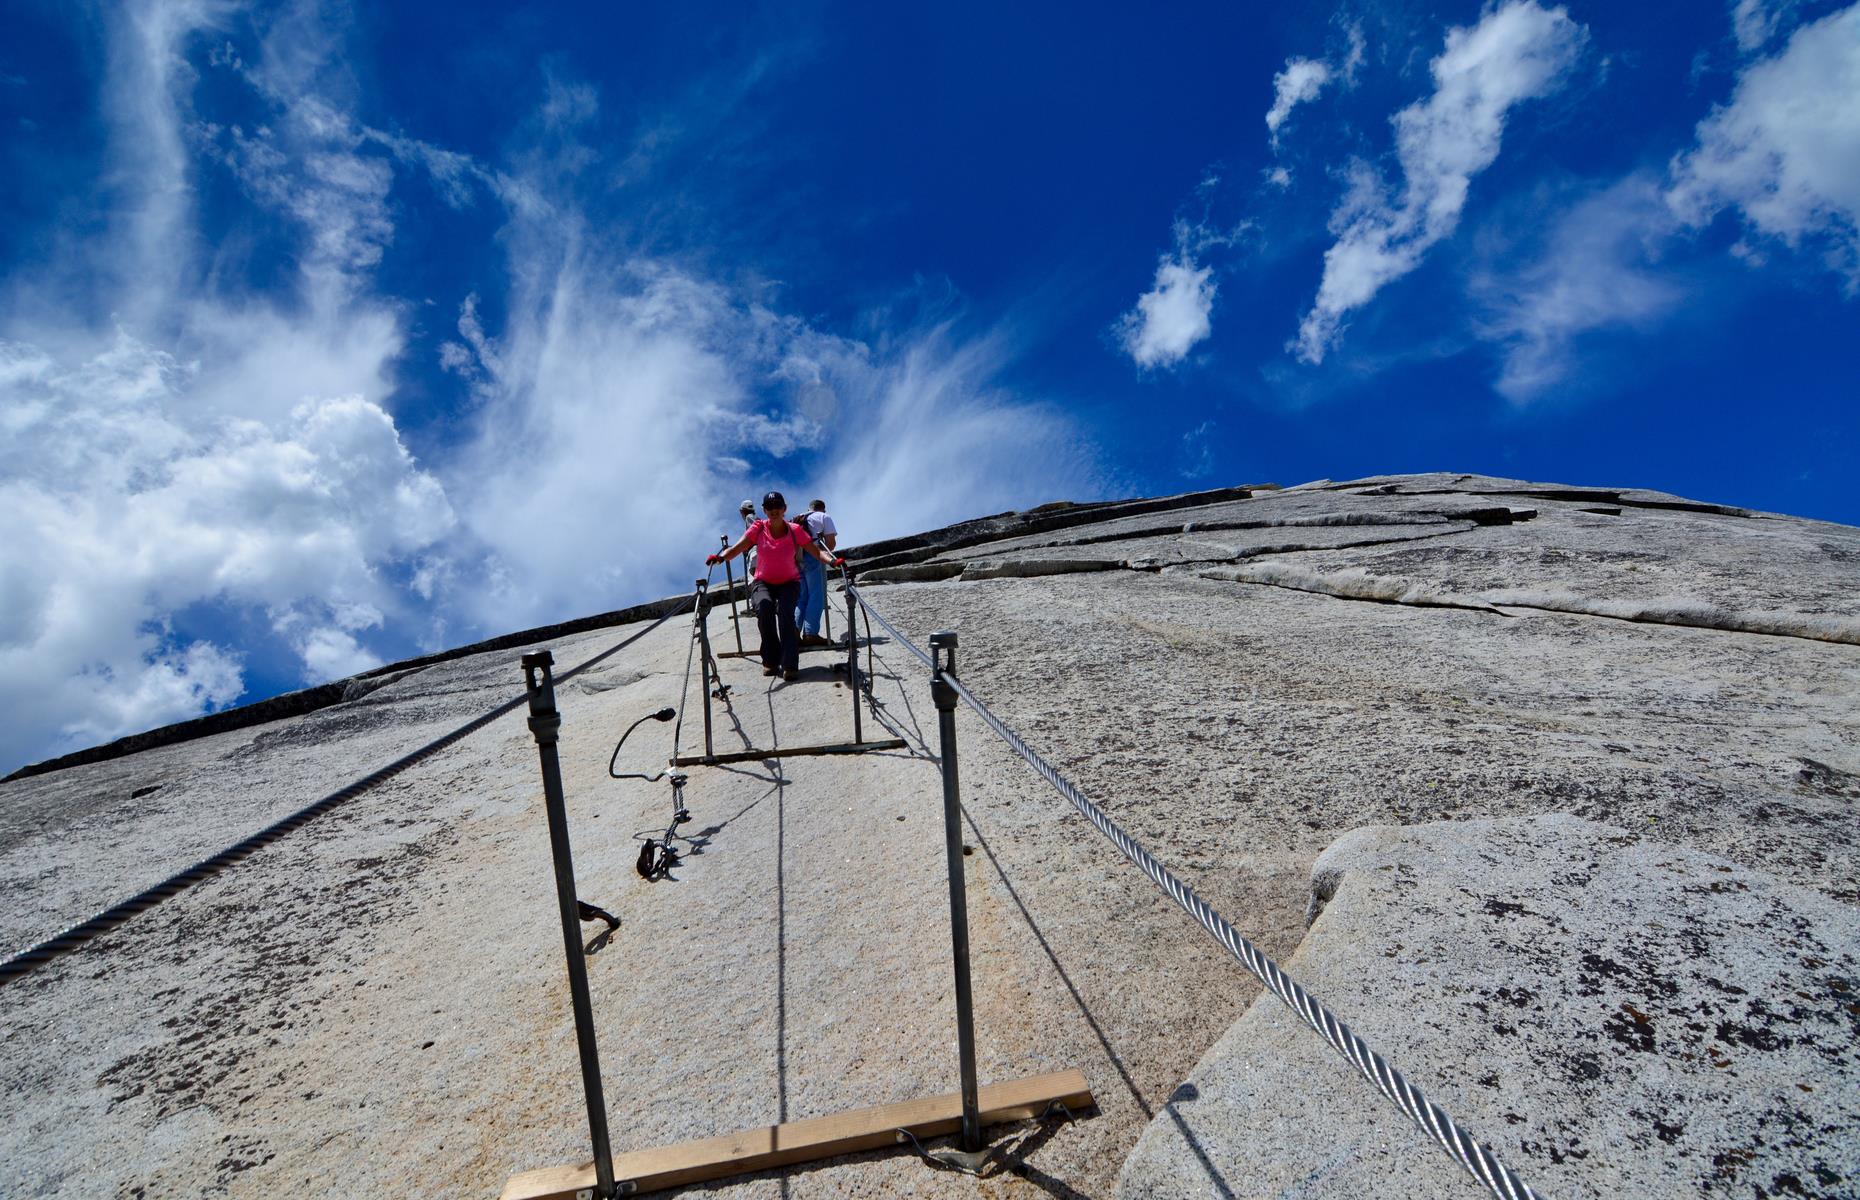 Treating you to jaw-dropping panoramas over the heart of the American West, climbing Half Dome is an adventure you won’t forget. It’s not for the faint of heart, though, as the ascent is strenuous. The defining feature of this climb are the iron cables (via ferrata) towards the summit, which allow you to reach the top without rock-climbing expertise. Just remember to bring a harness or go with an experienced guide.